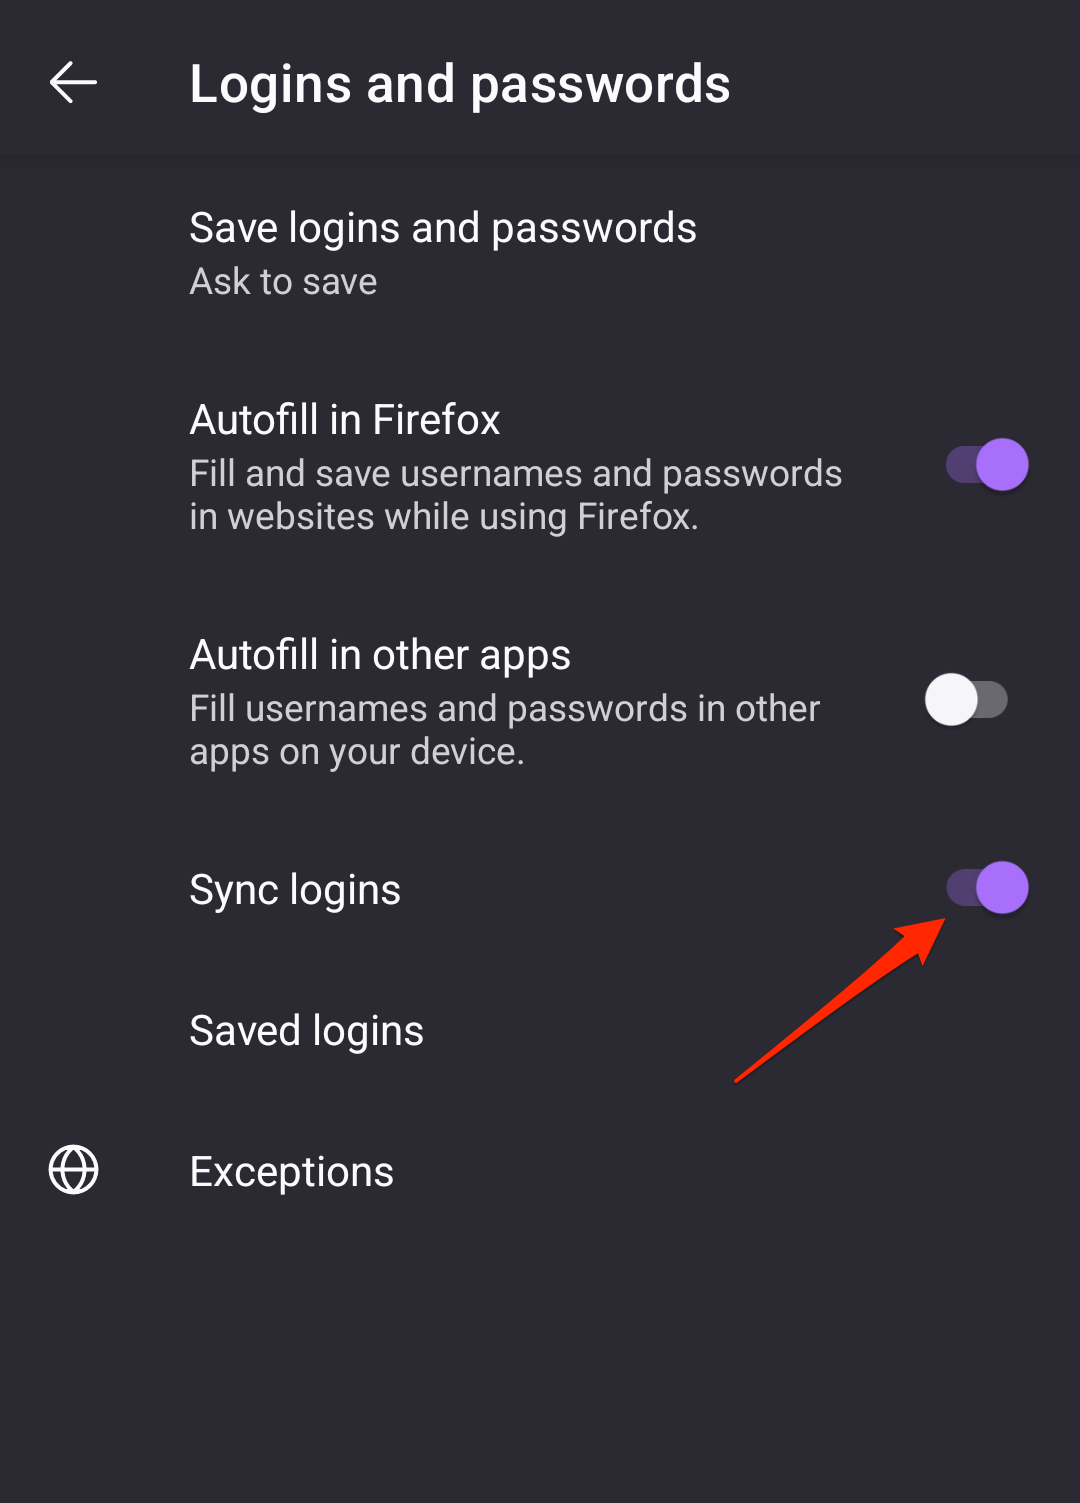 Enable Sync Logins in Firefox on Android